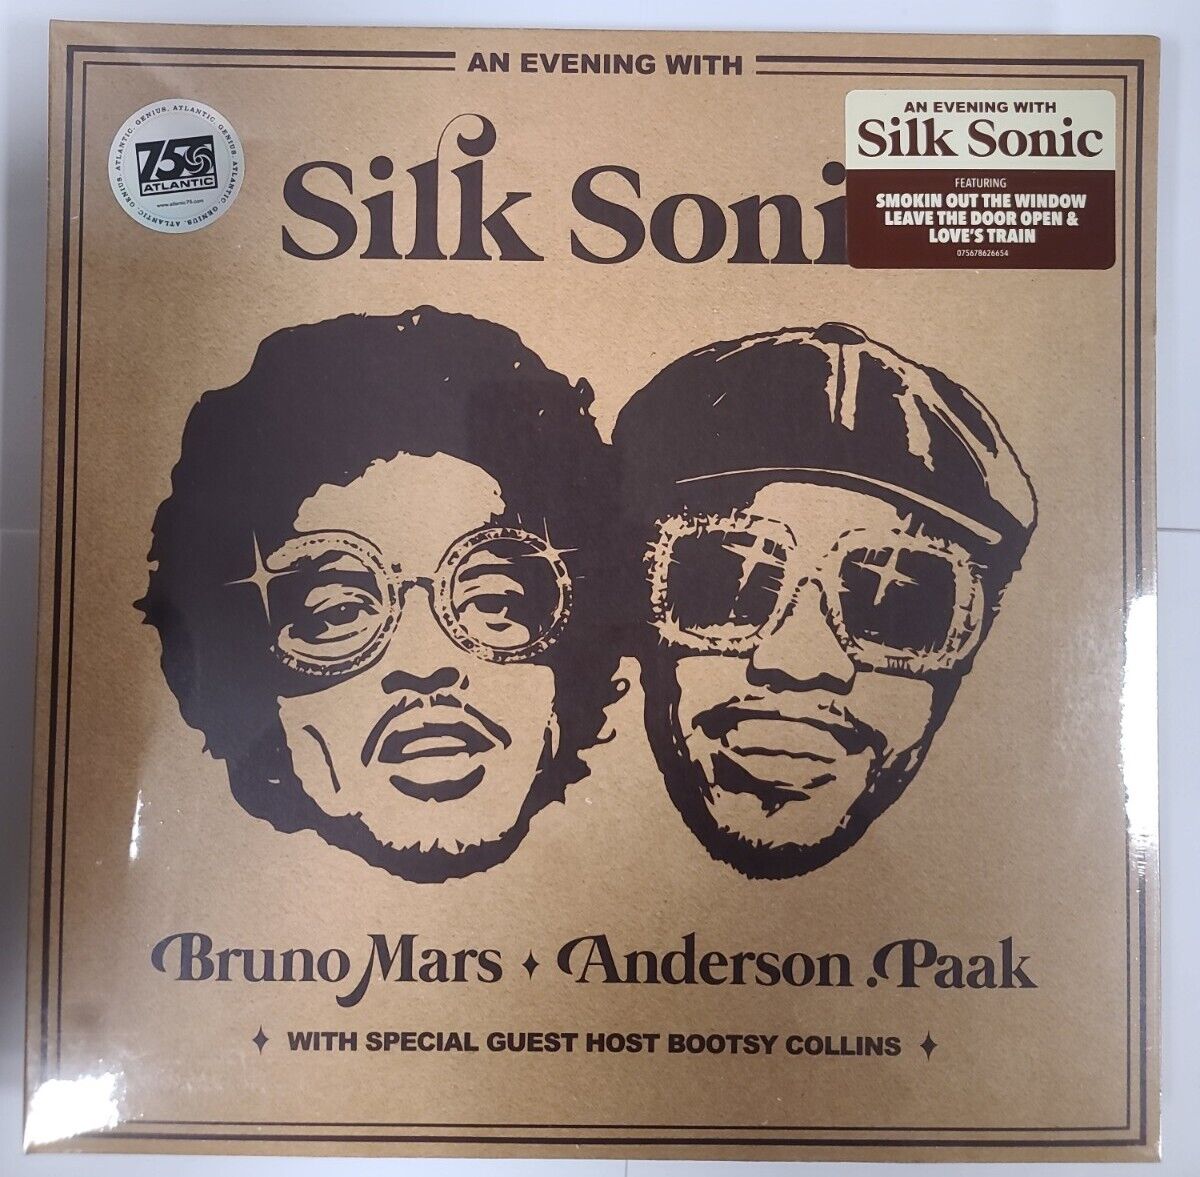 An Evening With Silk Sonic by Bruno Mars, Anderson .Paak, Silk Sonic (Record,...